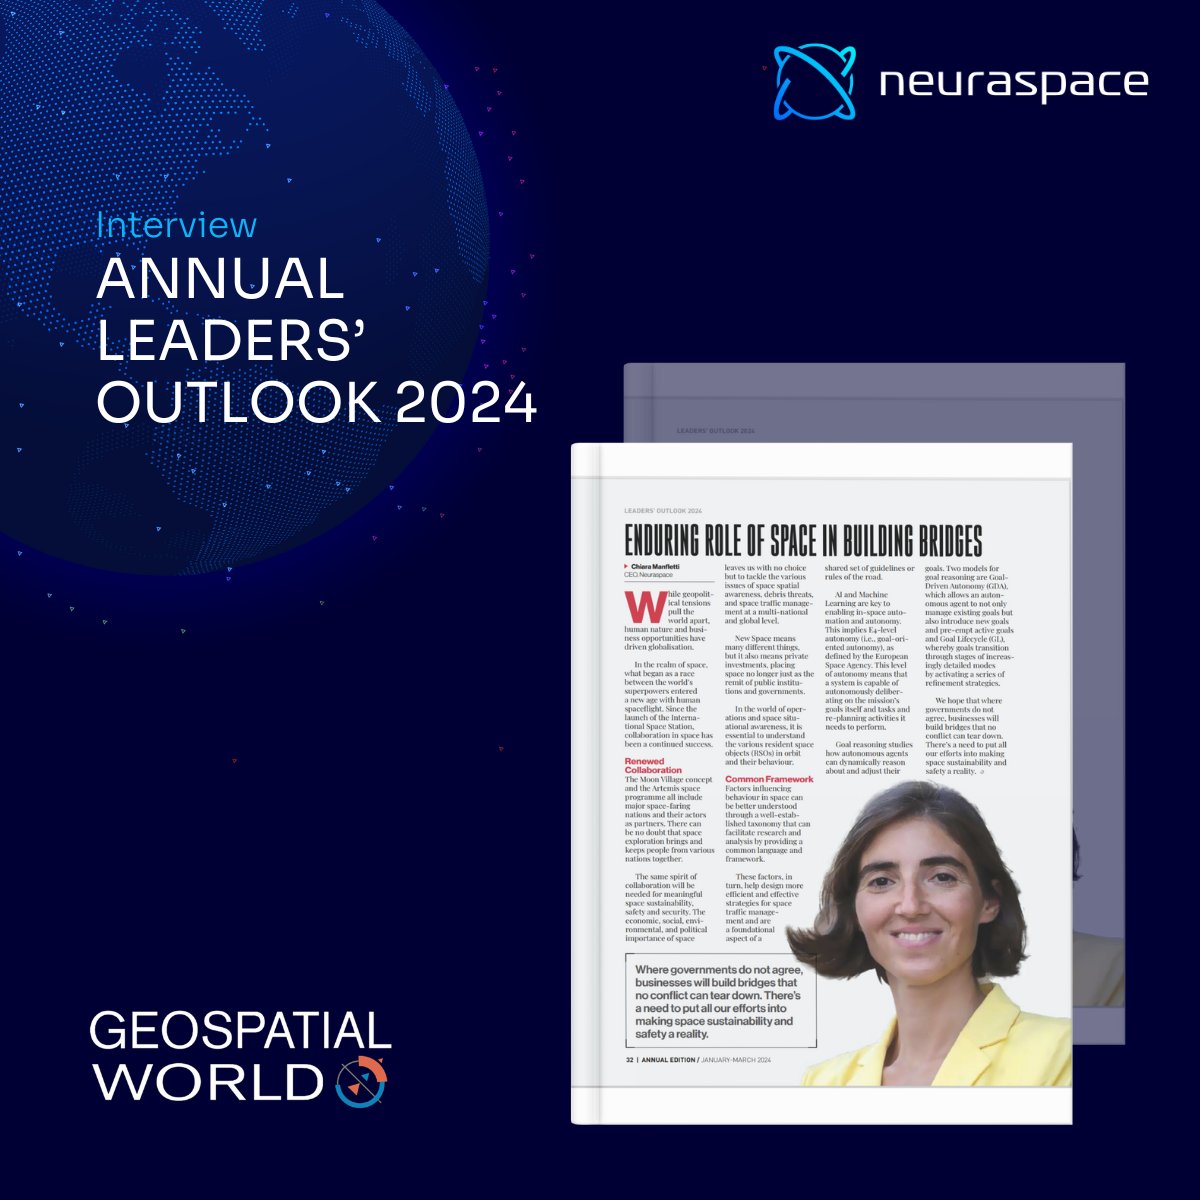 Read Chiara Manfletti's interview in the Geospatial World Annual Leadership Edition 2024: eu1.hubs.ly/H085cpr0